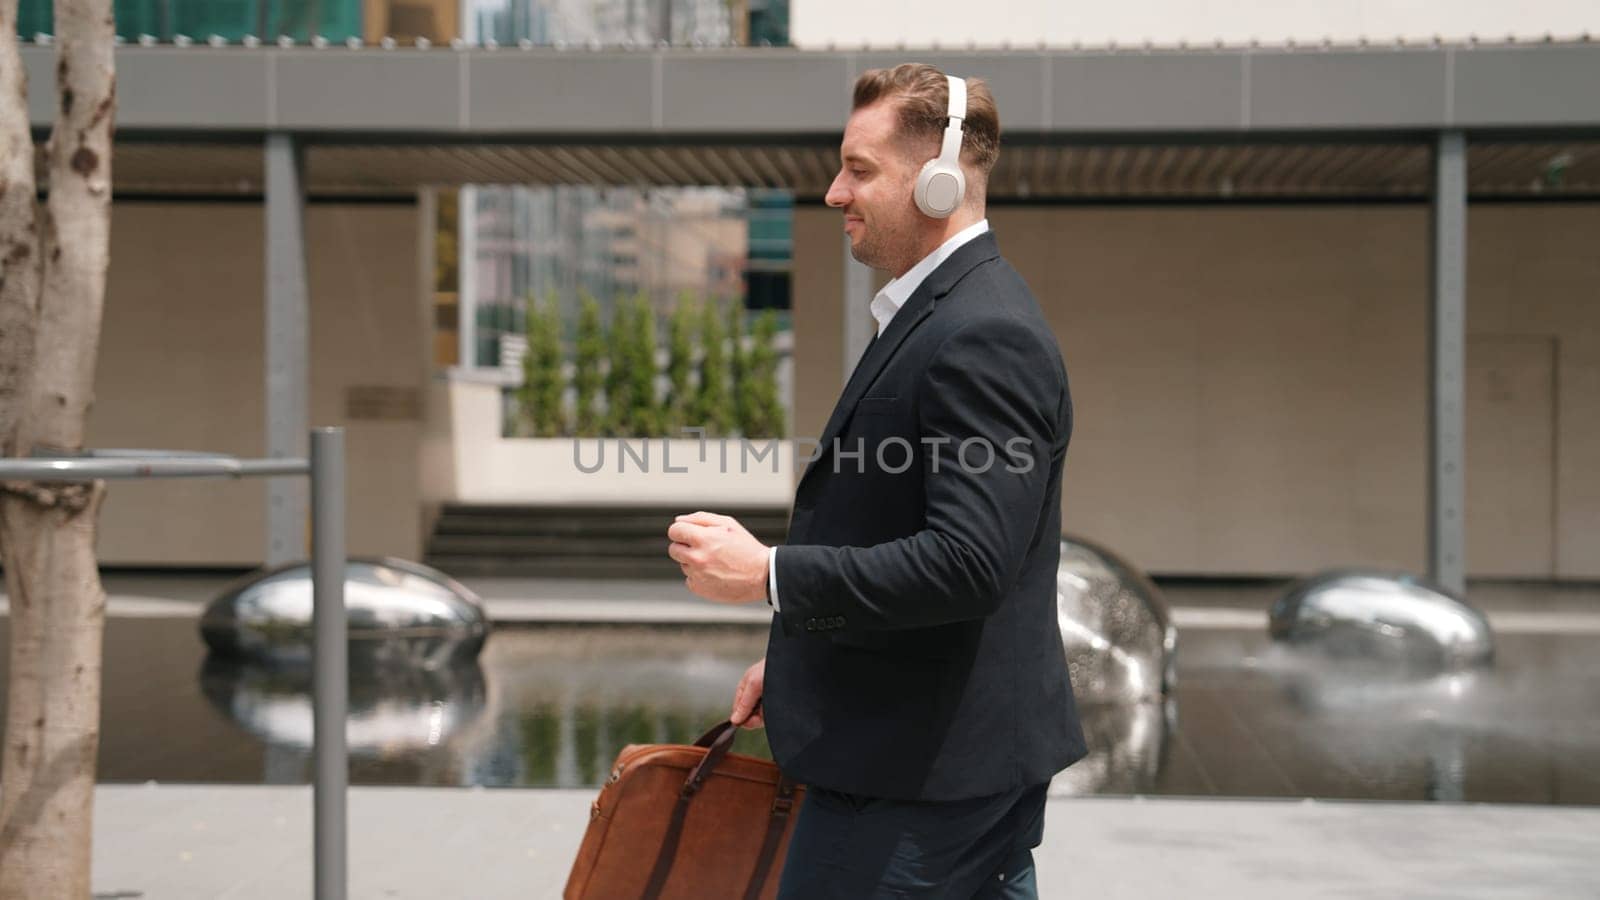 Project manager with headphone walking workplace while moving to music. Urbane. by biancoblue